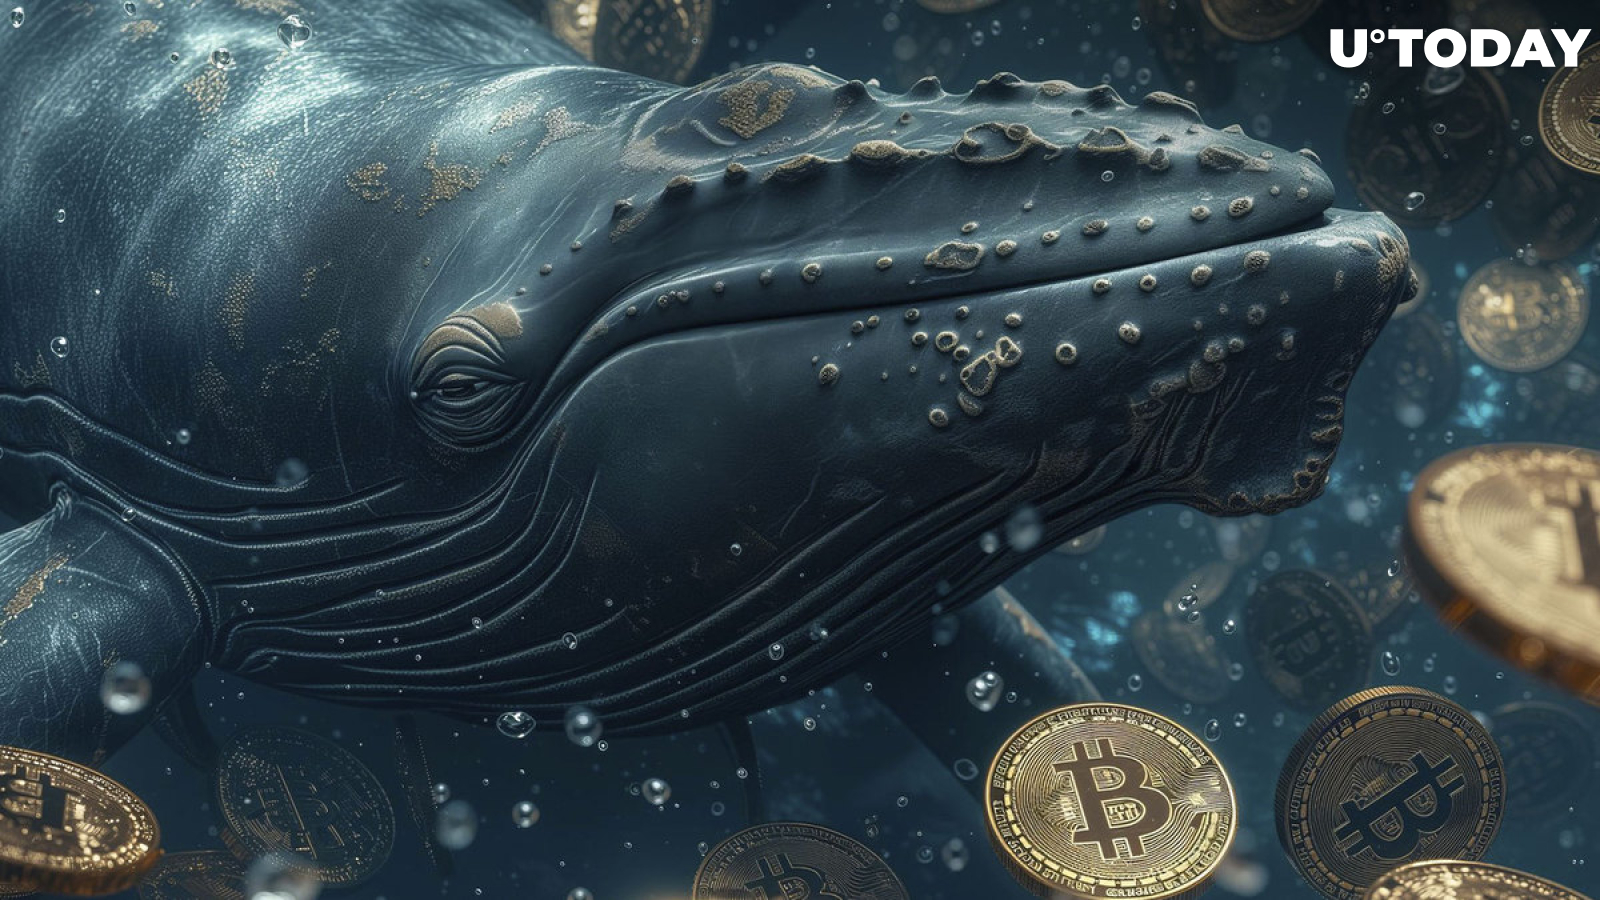 Veteran Bitcoin Whales' On-chain Antics Spark Intrigue - Who's Gaining?